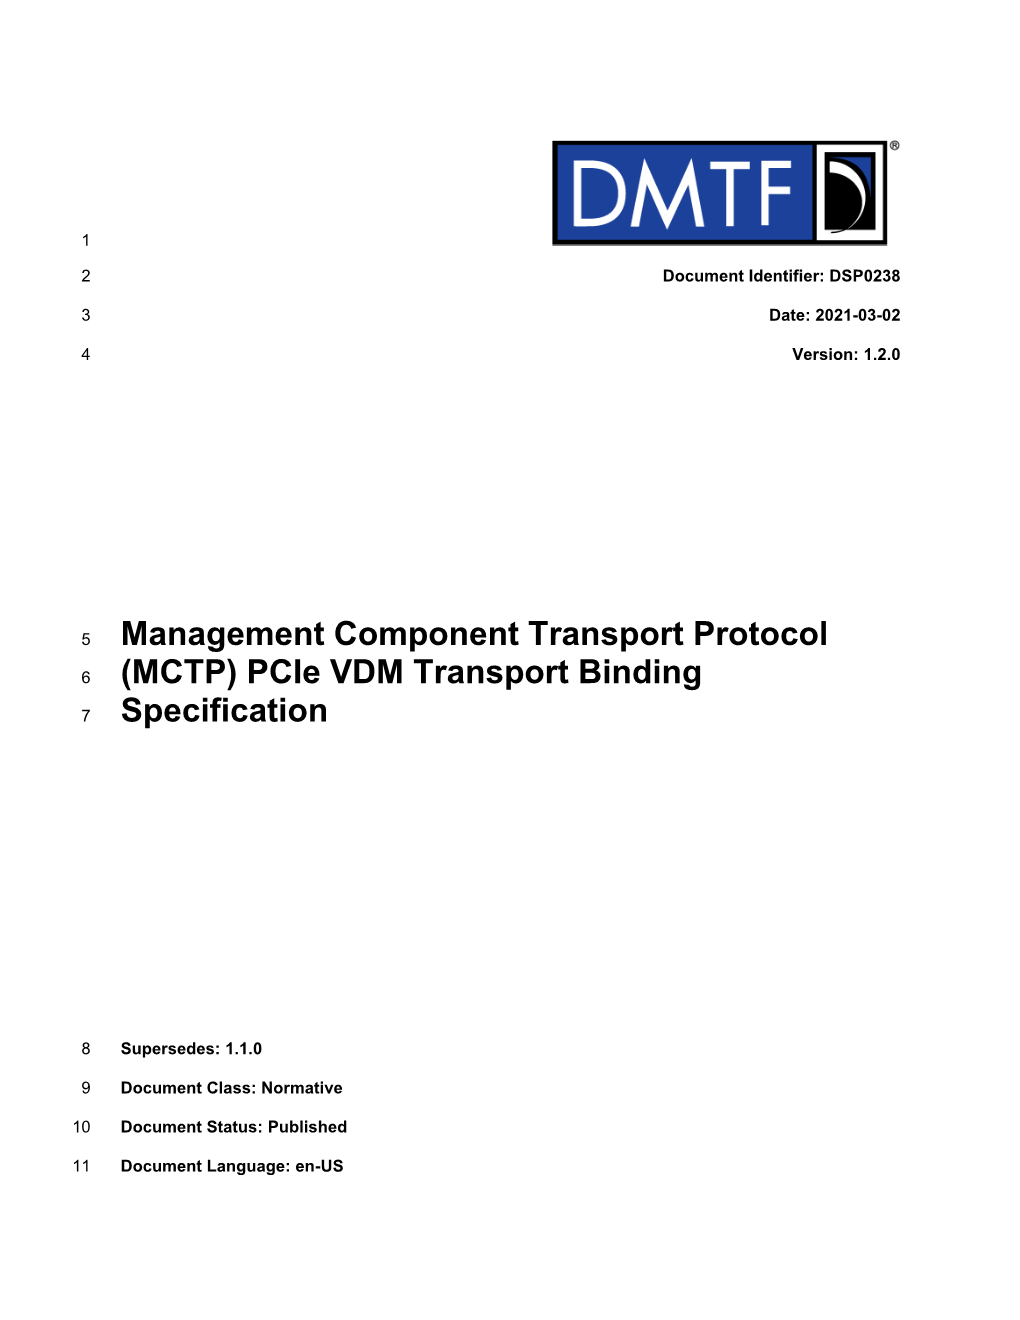 (MCTP) Pcie VDM Transport Binding Specification 77 (DSP0238) Was Prepared by the PMCI Working Group